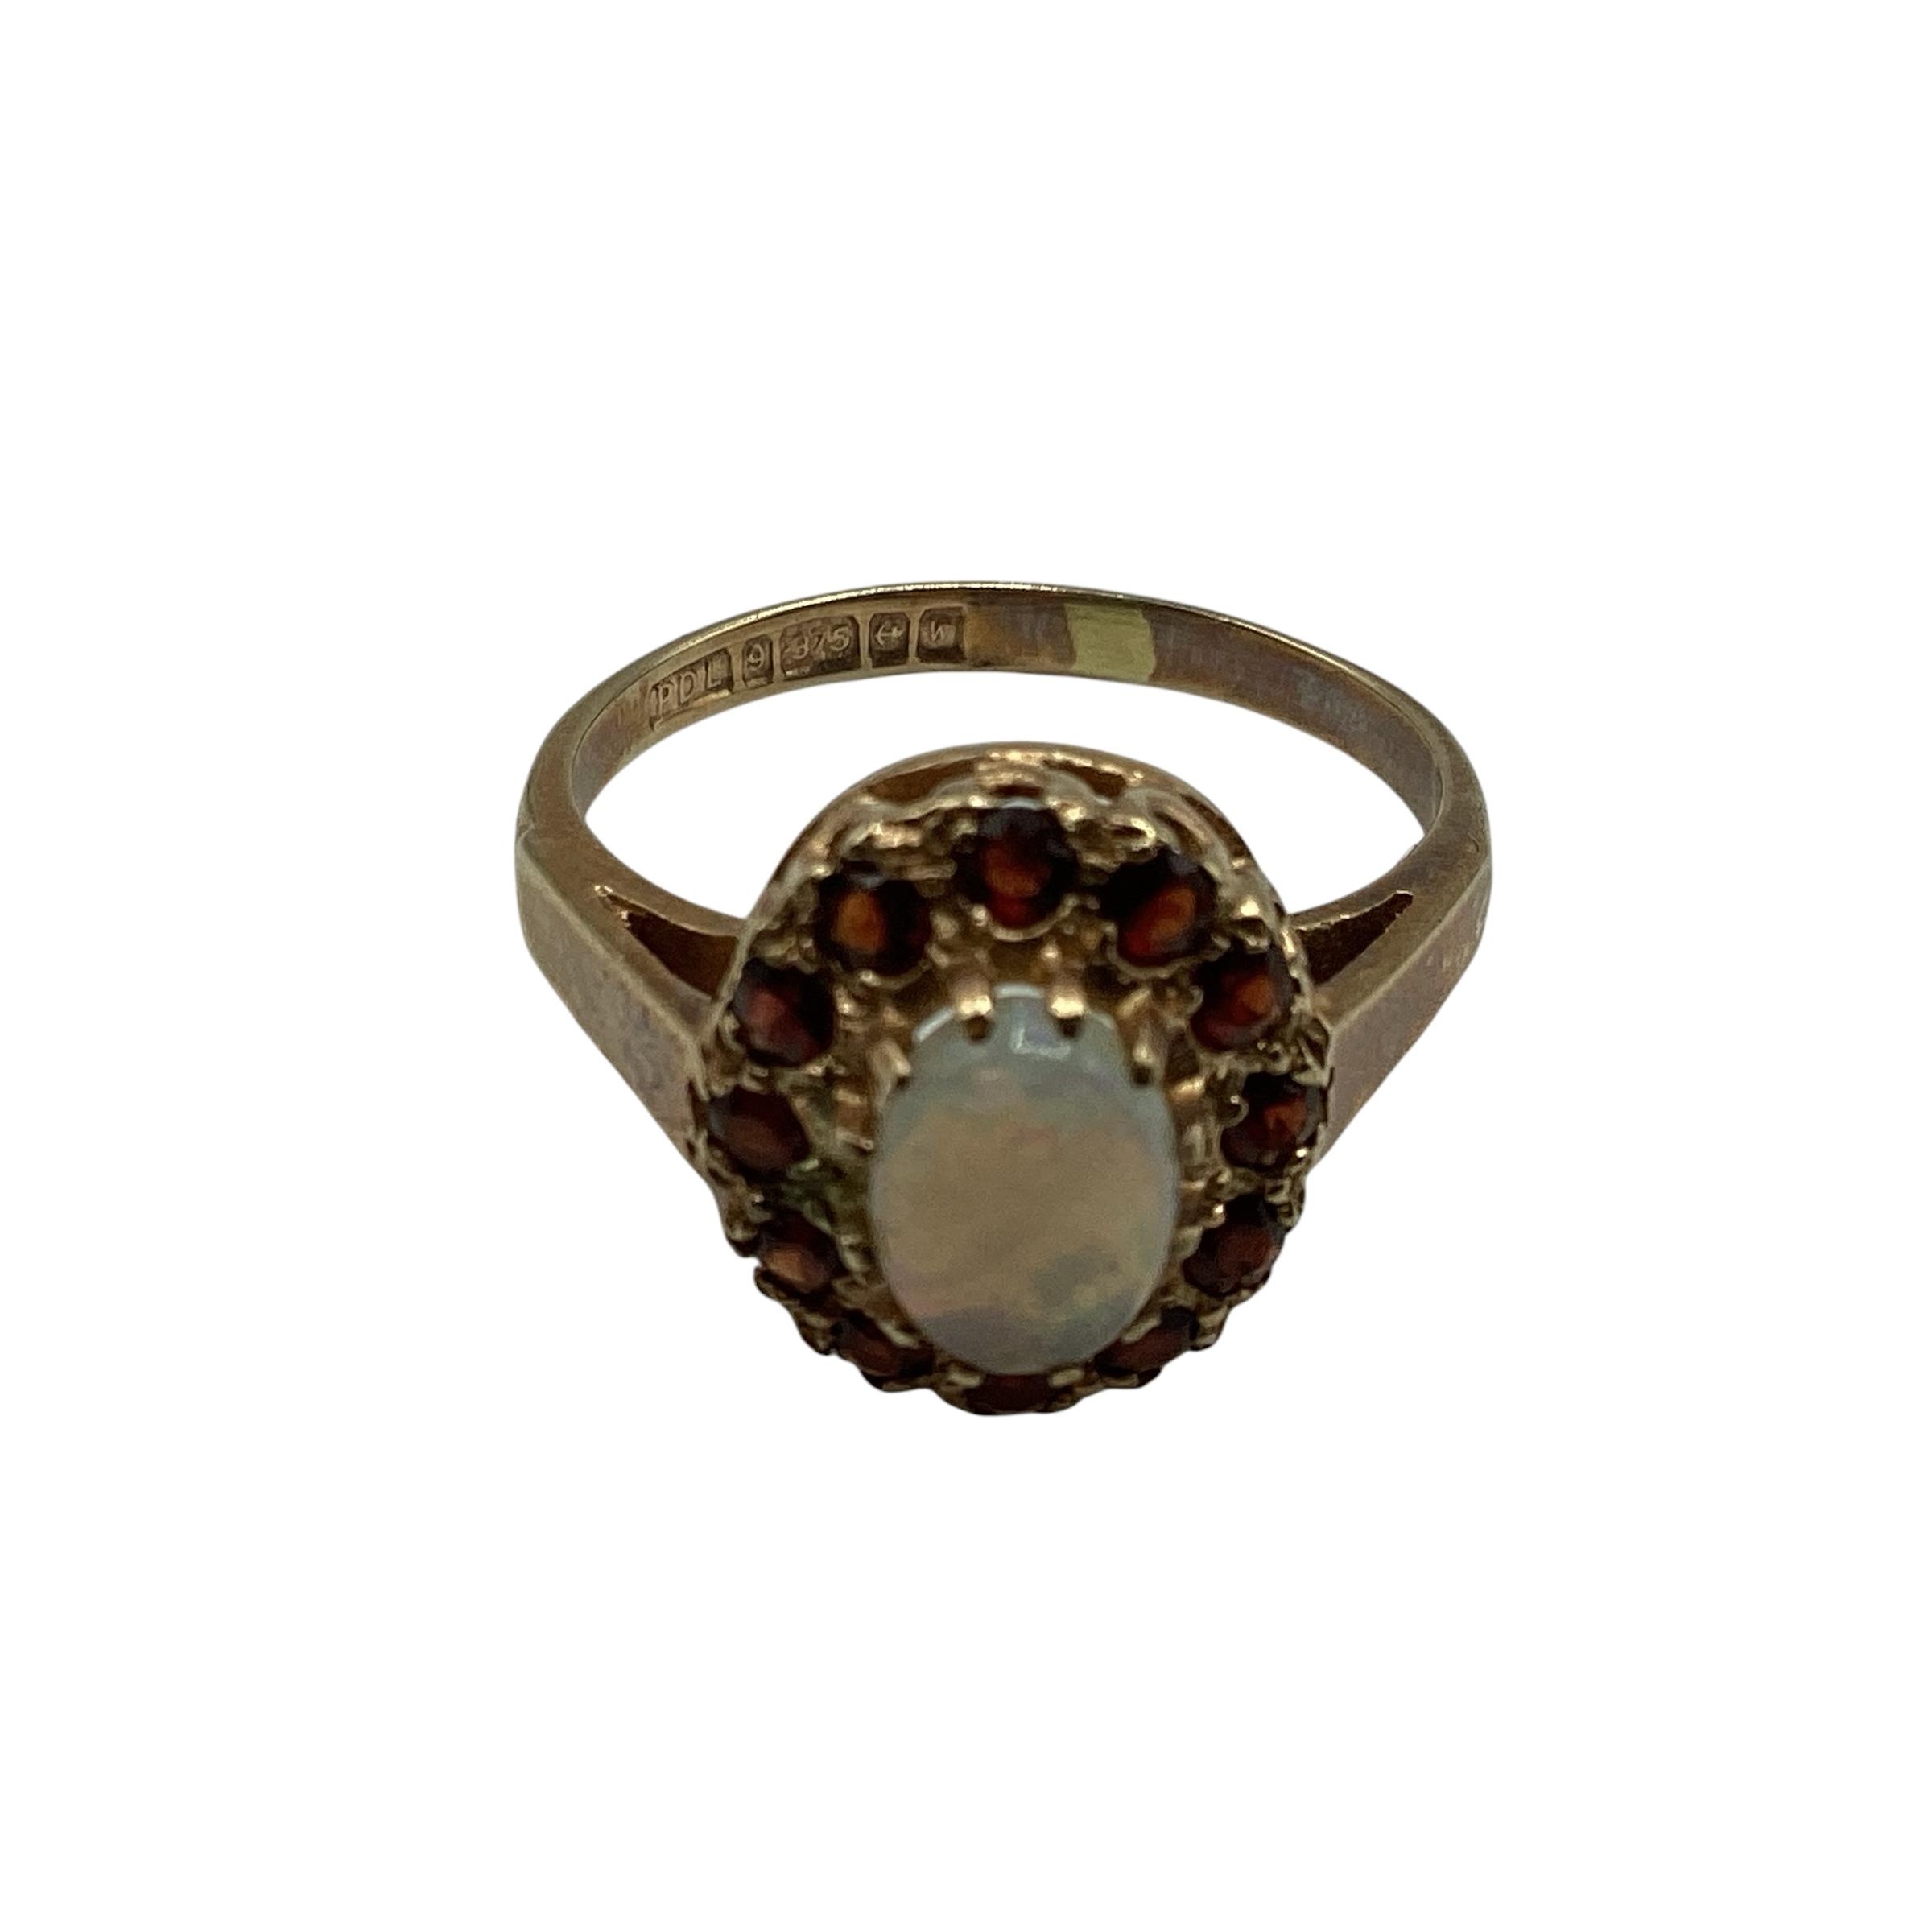 9 ct gold opal and garnet ring central oval opal with a surround of single cut red garnets size K,